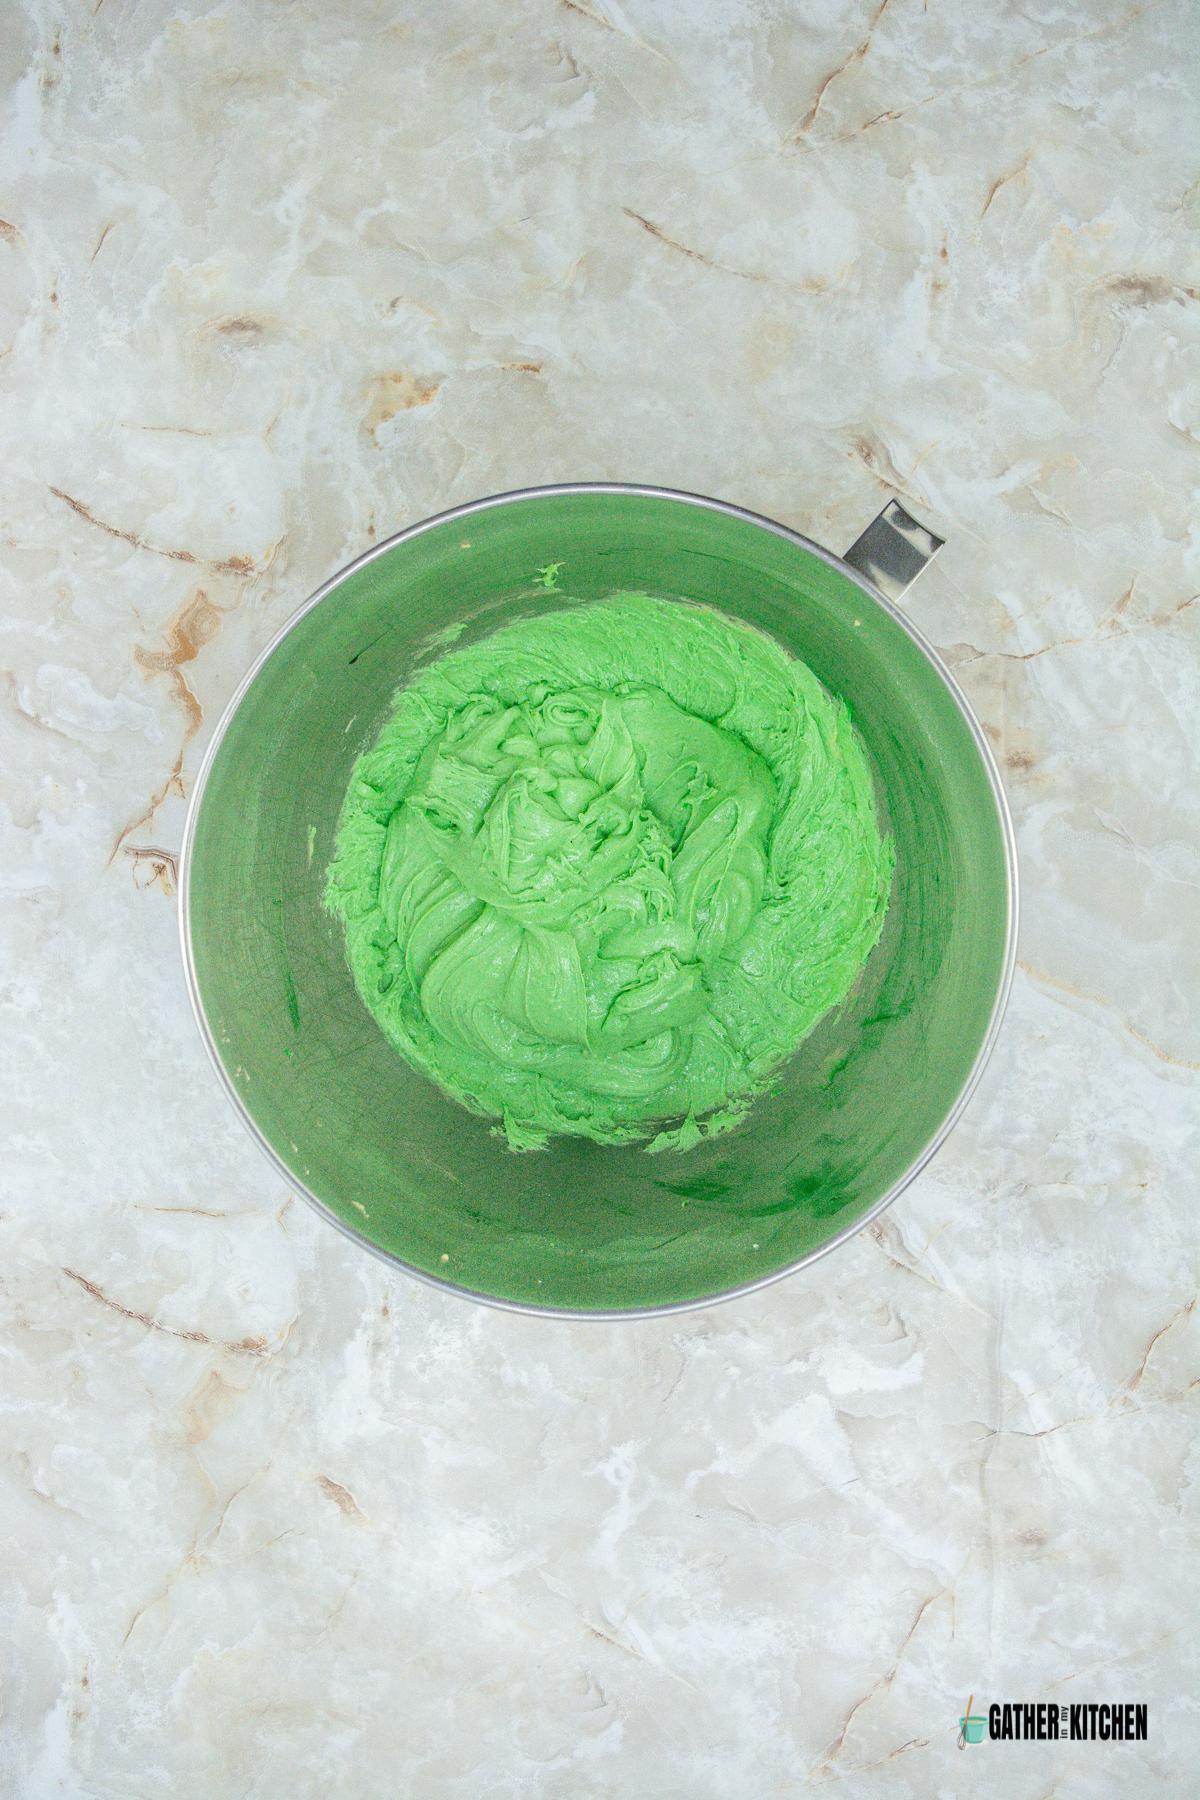 Cake mixture with green food coloring.